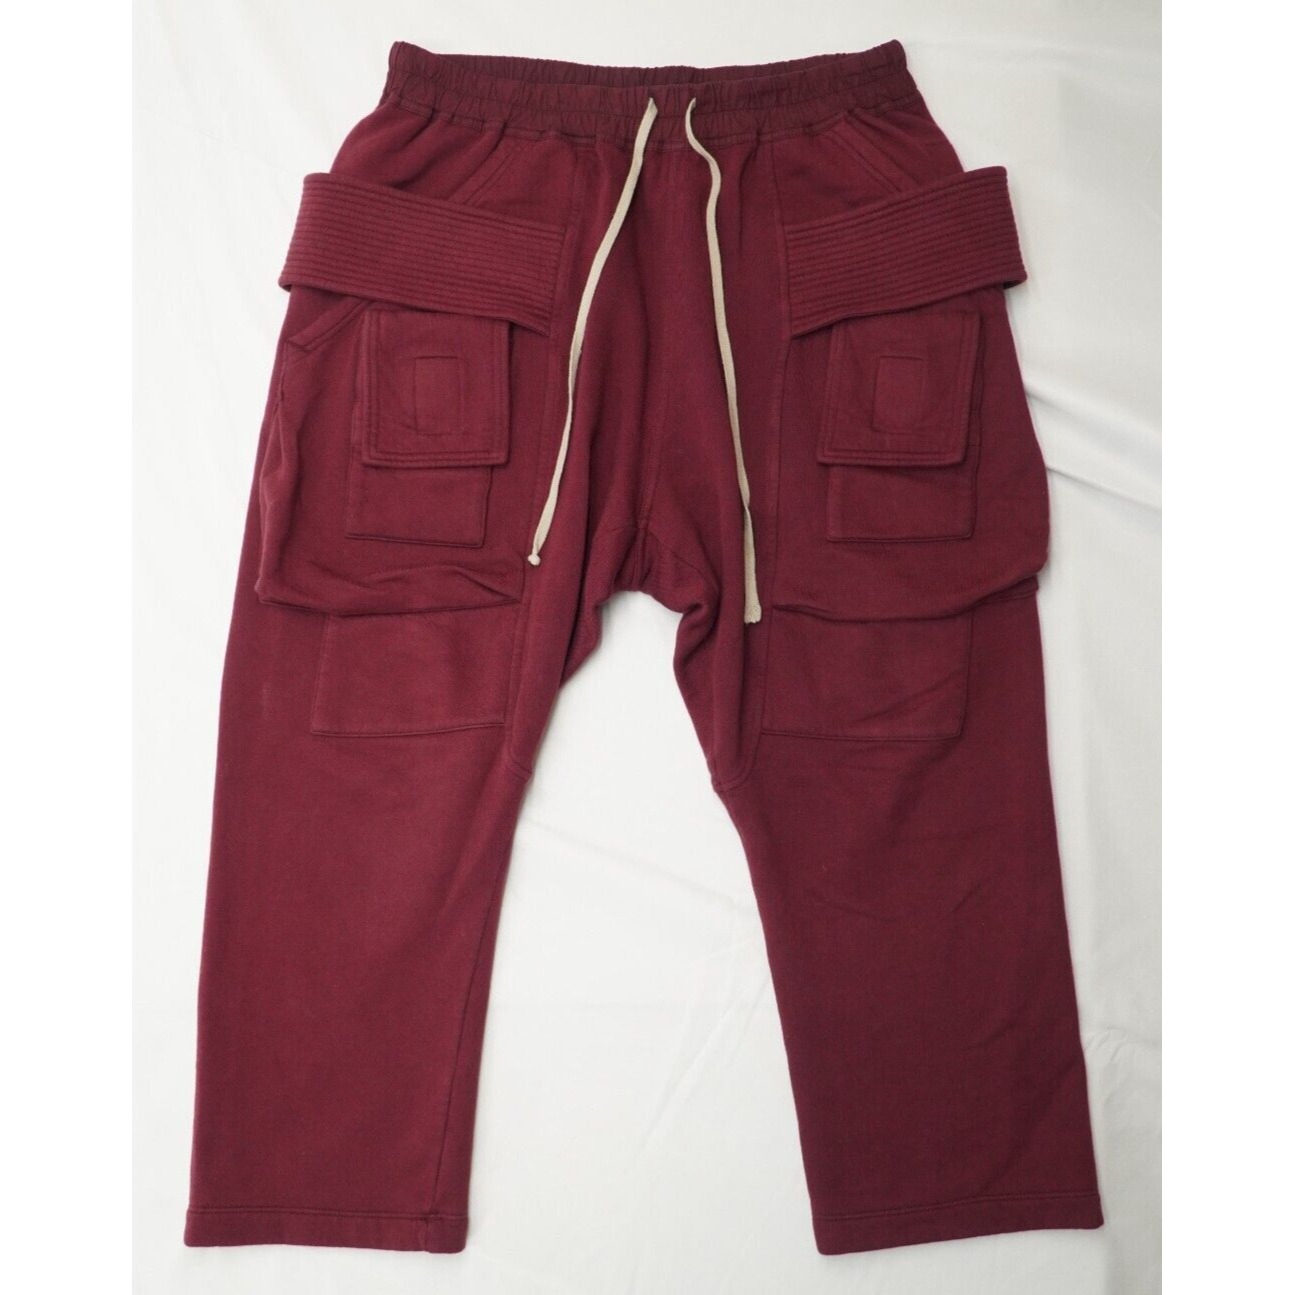 Rick Creatch Cargo Cropped Sweatpant Bruise Red FW20 - 3